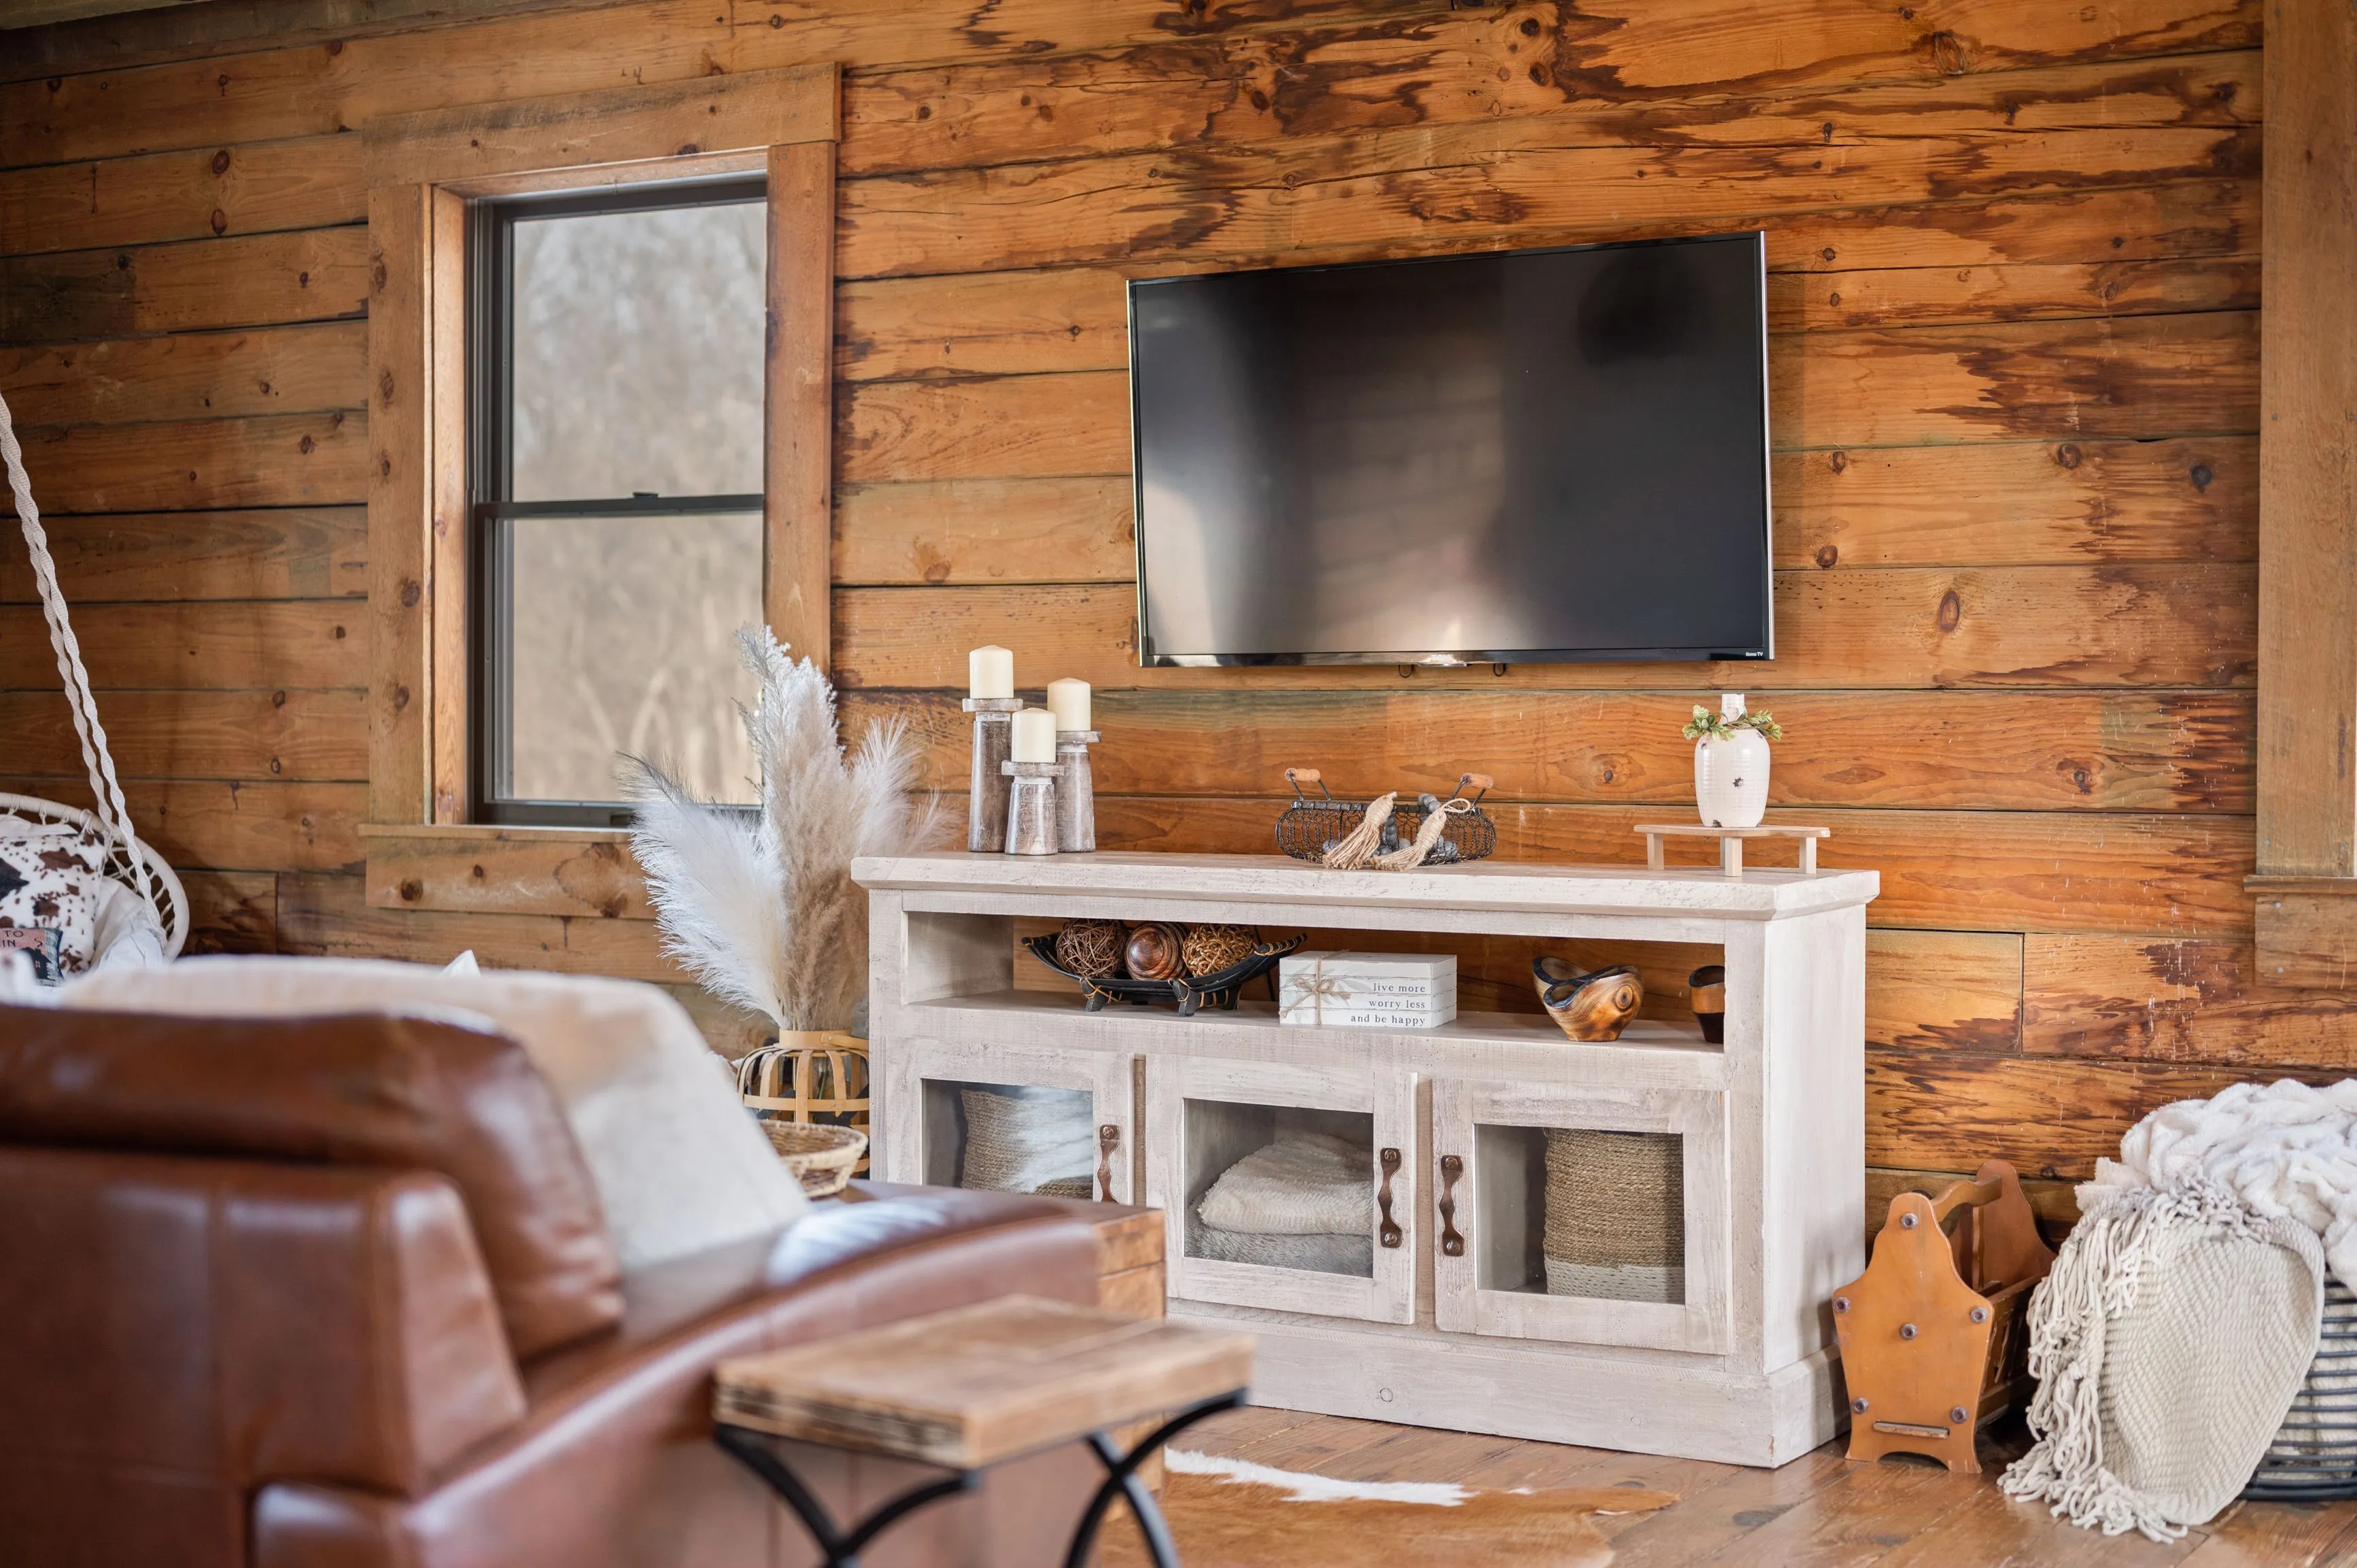 Cozy living room with rustic wooden interior, featuring a flat-screen TV mounted on the wall above a decorative console table, with a leather sofa and cowhide rug in the foreground.